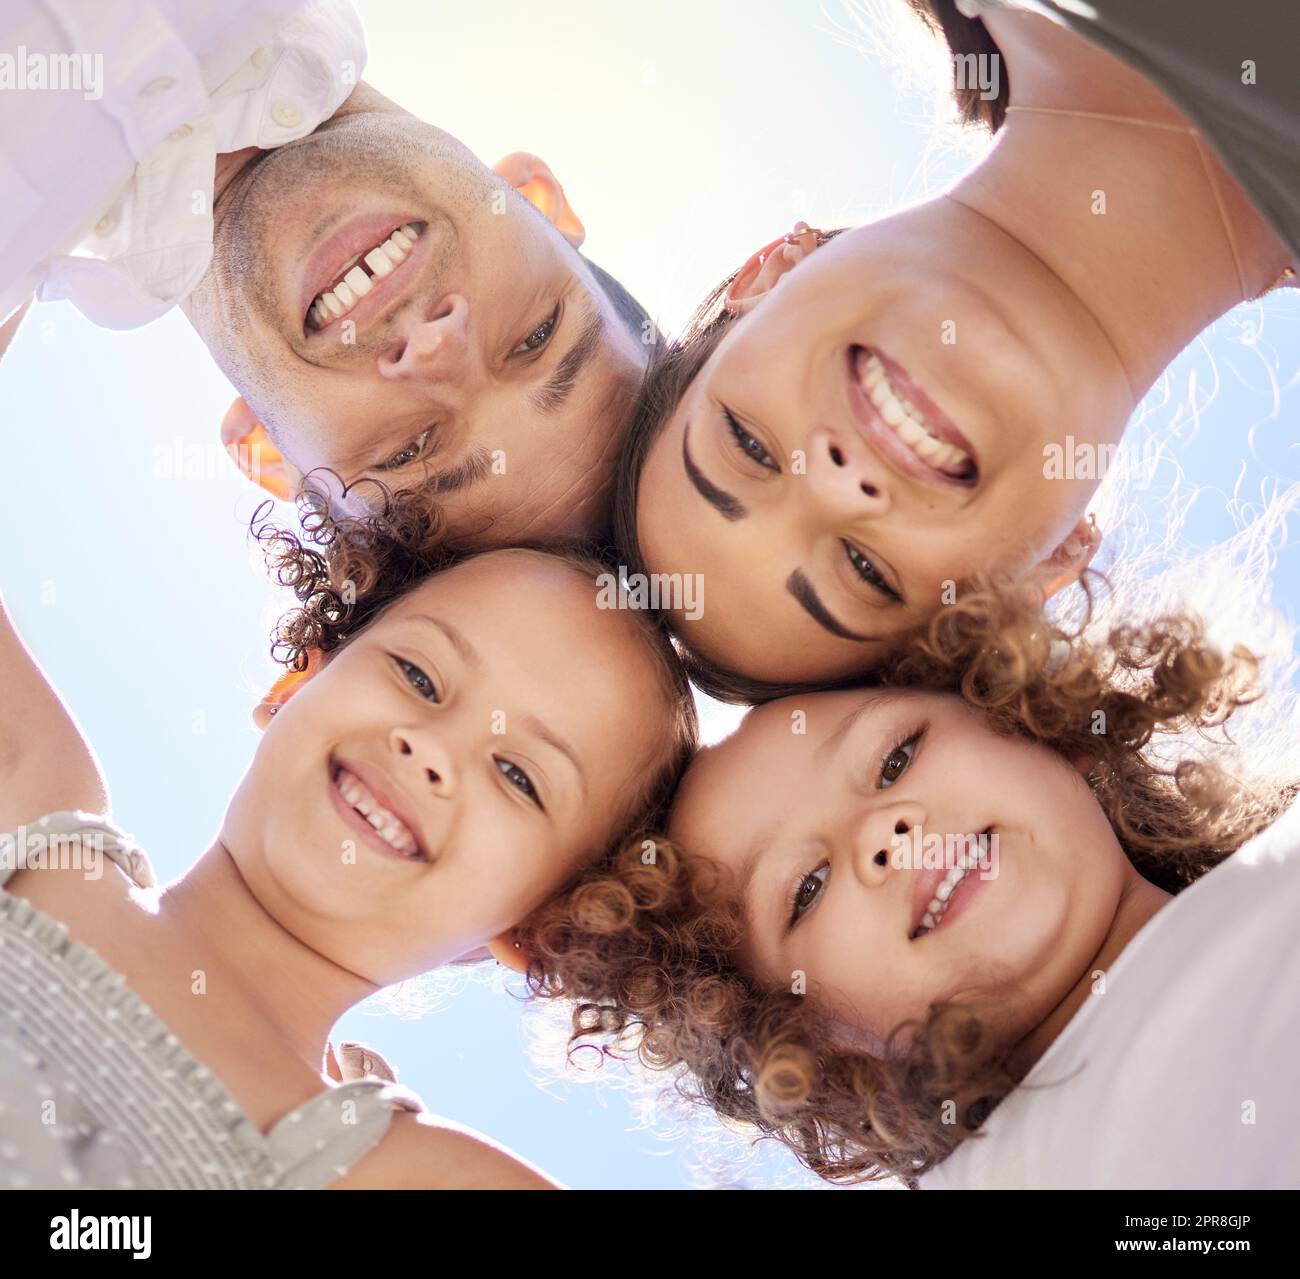 Our circle of love, support and strength. Low angle portrait of a happy young family huddled together on a fun day outdoors. Stock Photo